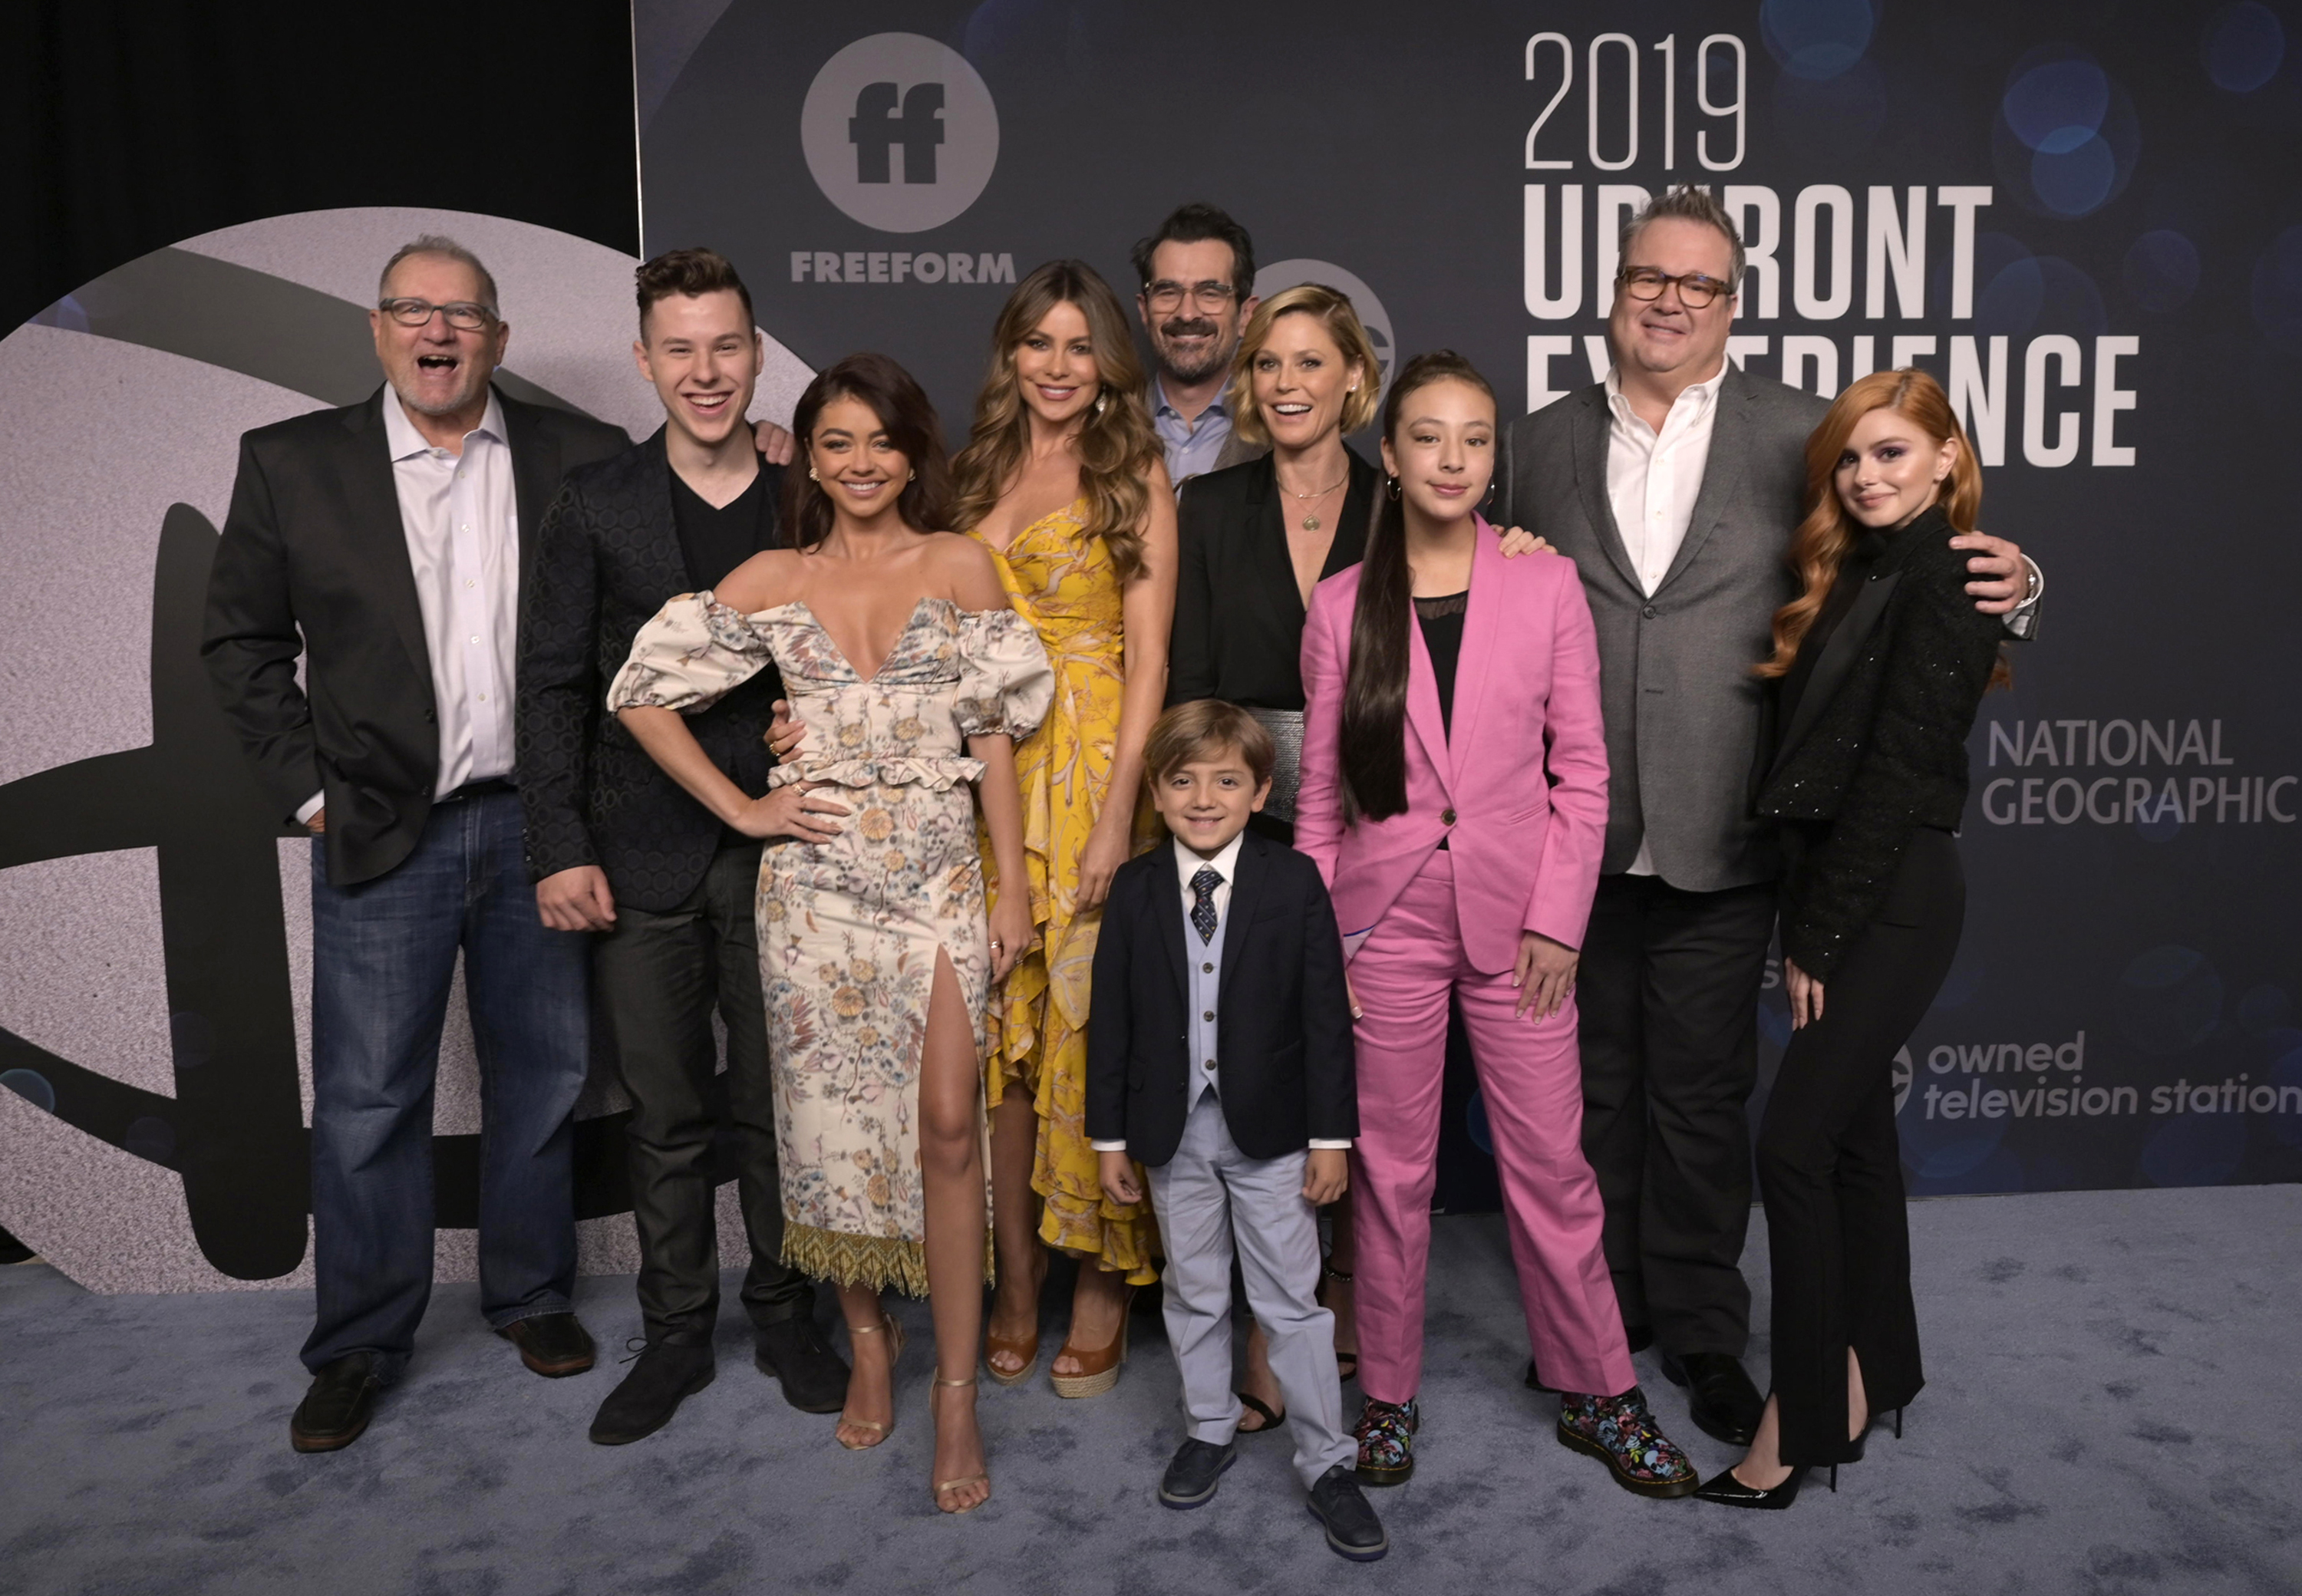 The "Modern Family" cast during ABC's coverage of the Disney 2019 Upfront Experience on May 14, 2019 in New York City | Source: Getty Images